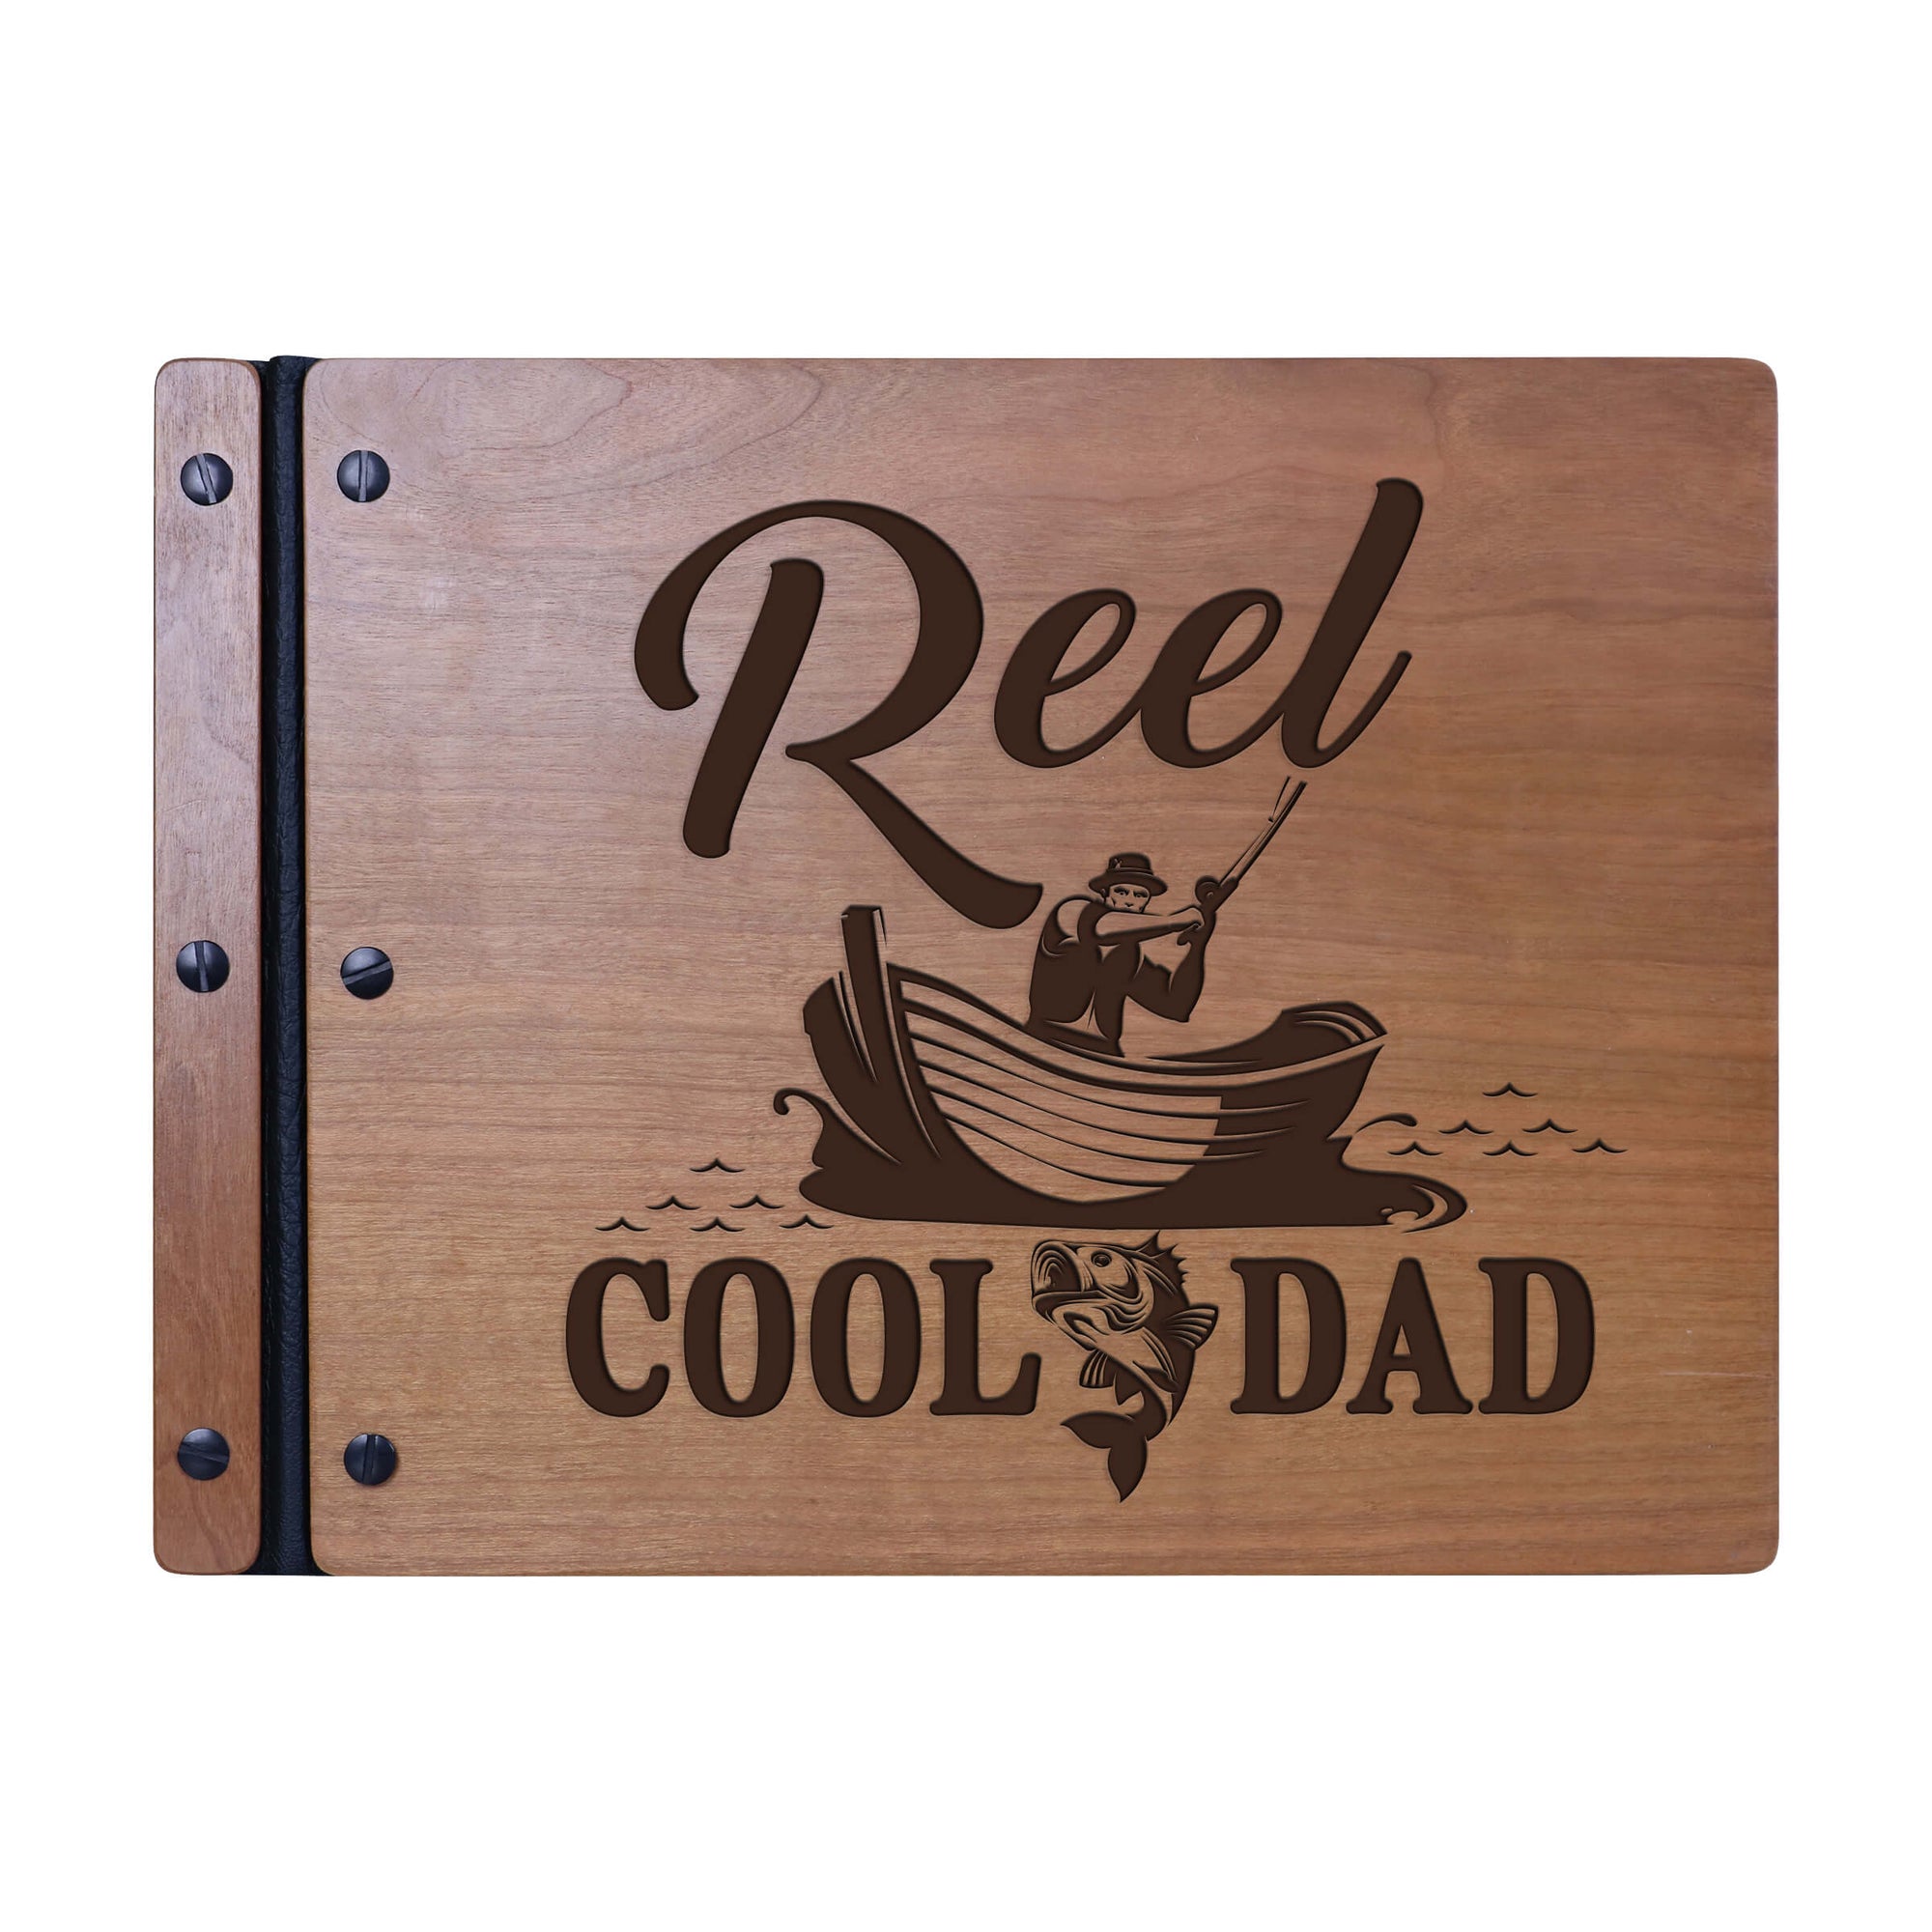 Wooden Memorial Large Guestbook with Fisherman Verse for Funeral Service - Reel Cool Dad